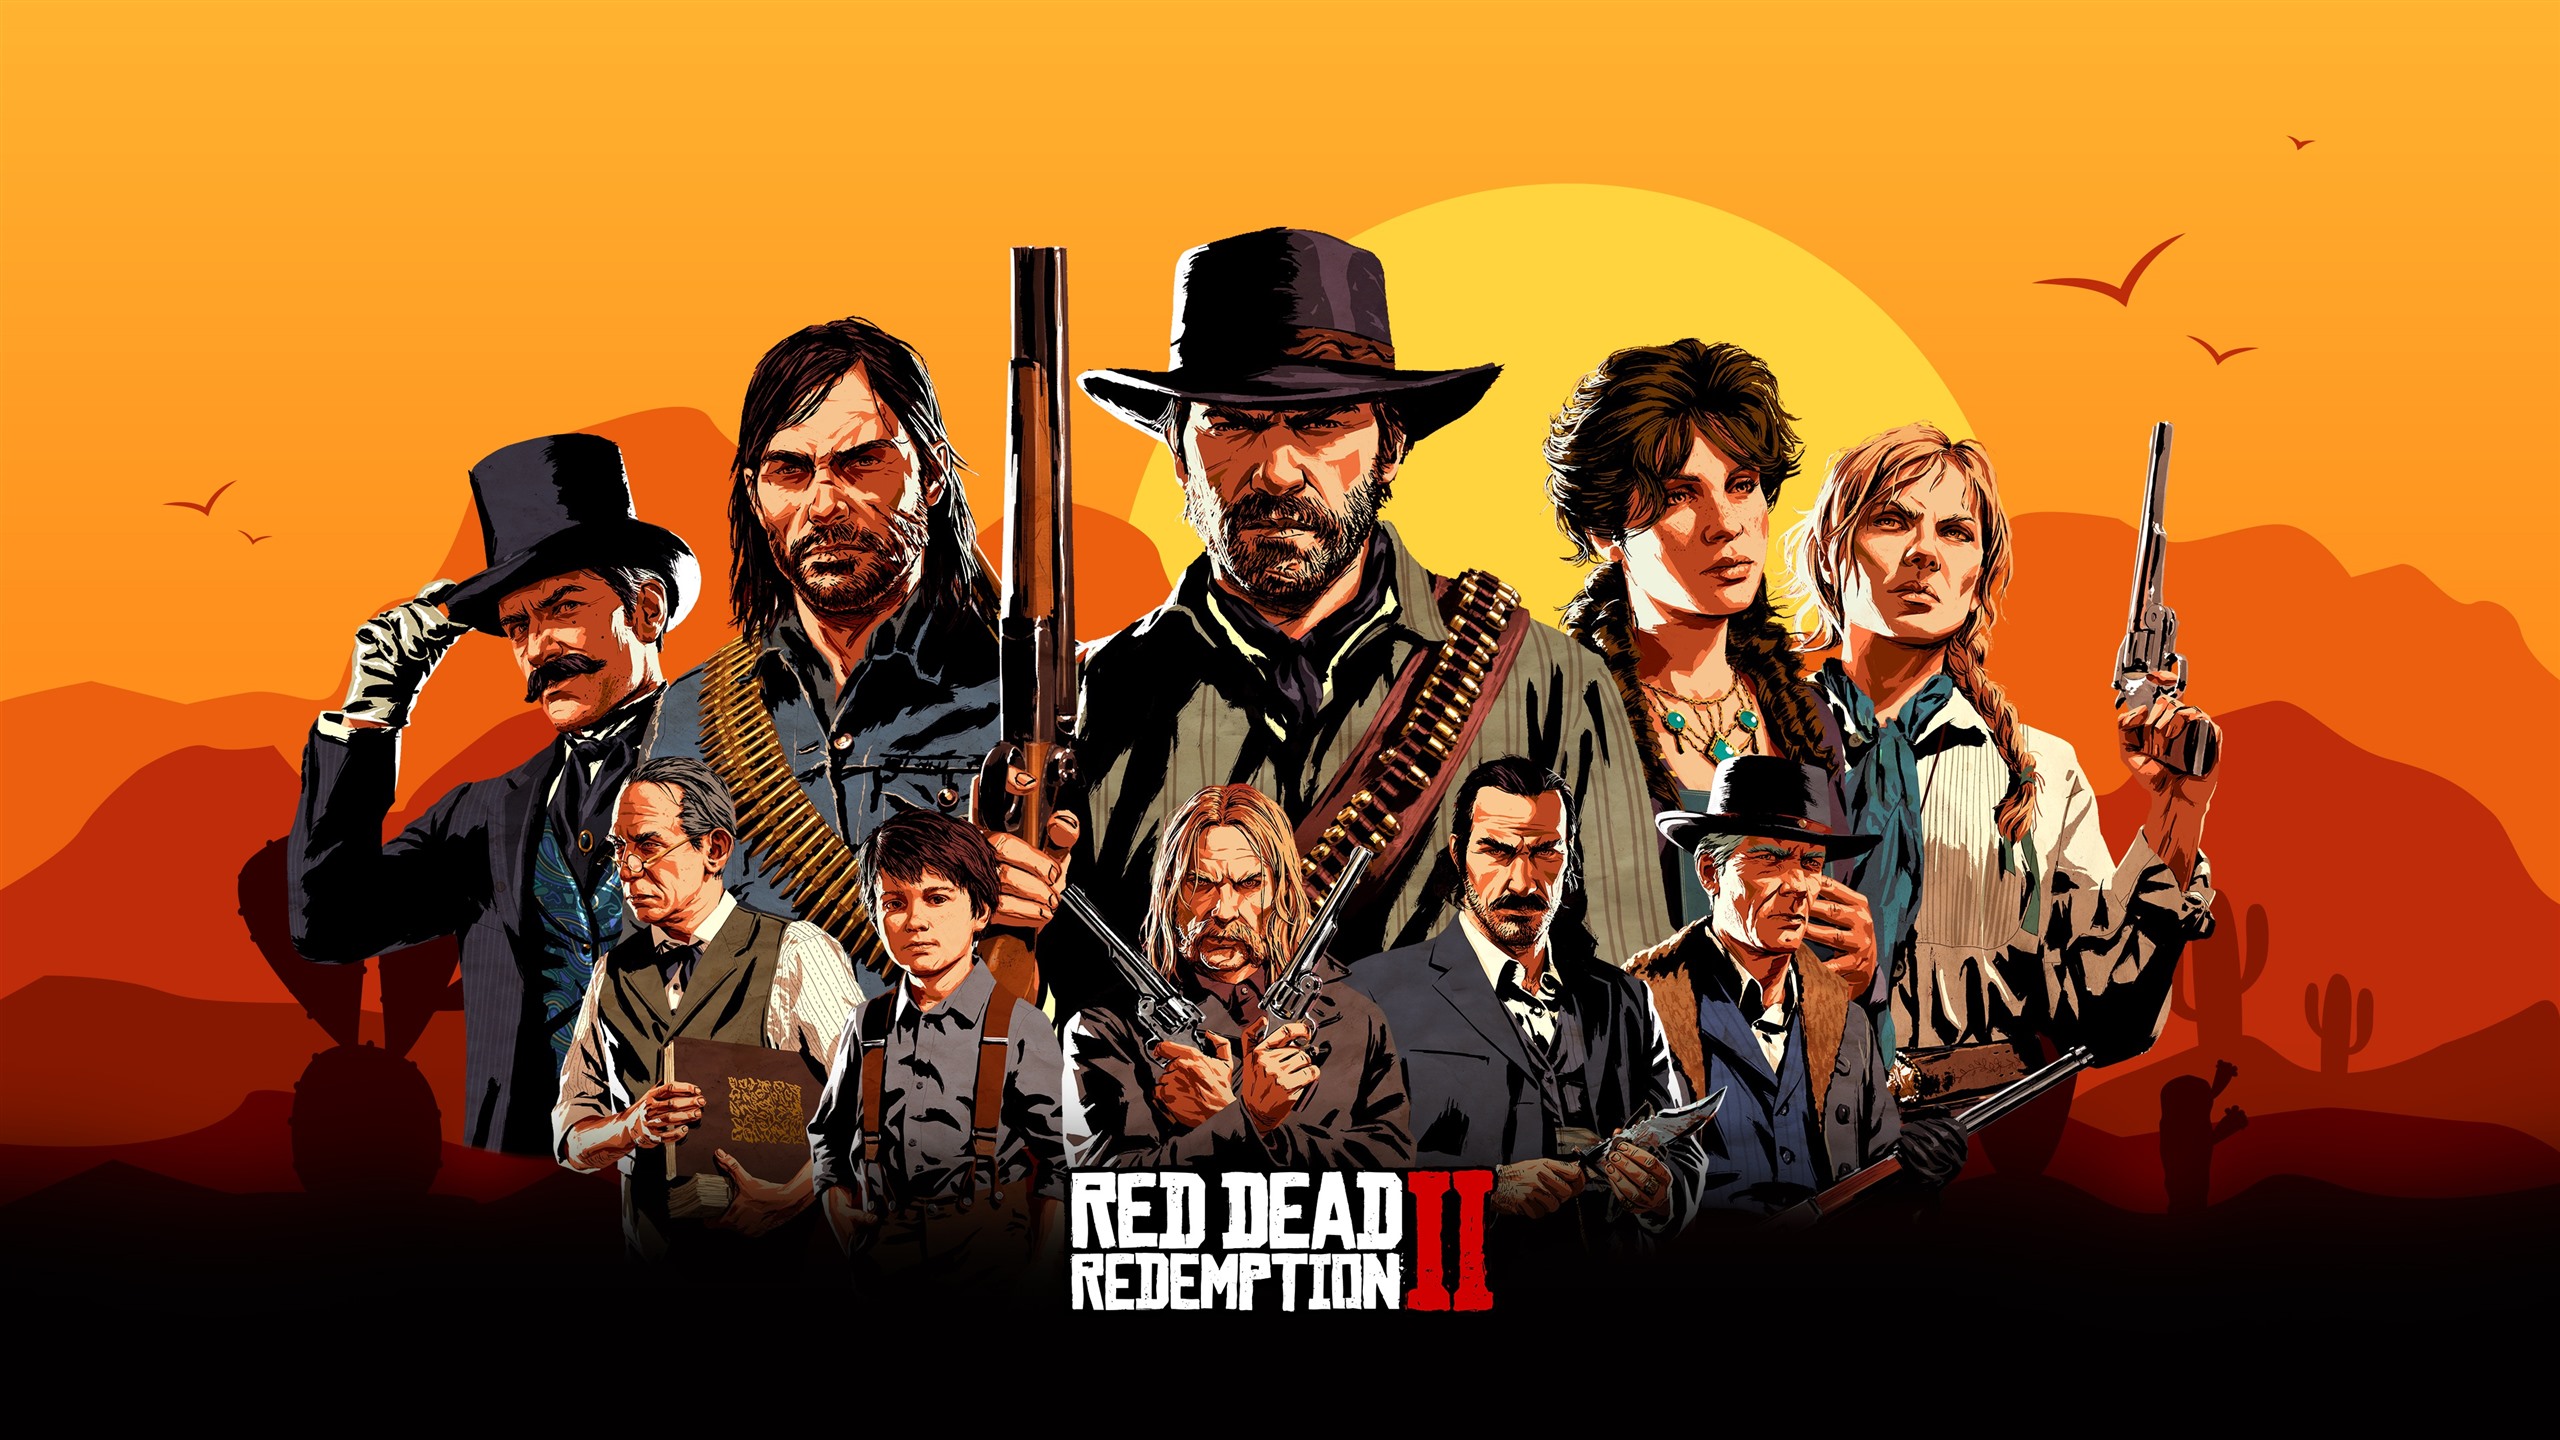 Red-Dead-Redemption-2-art-picture_2560x1440